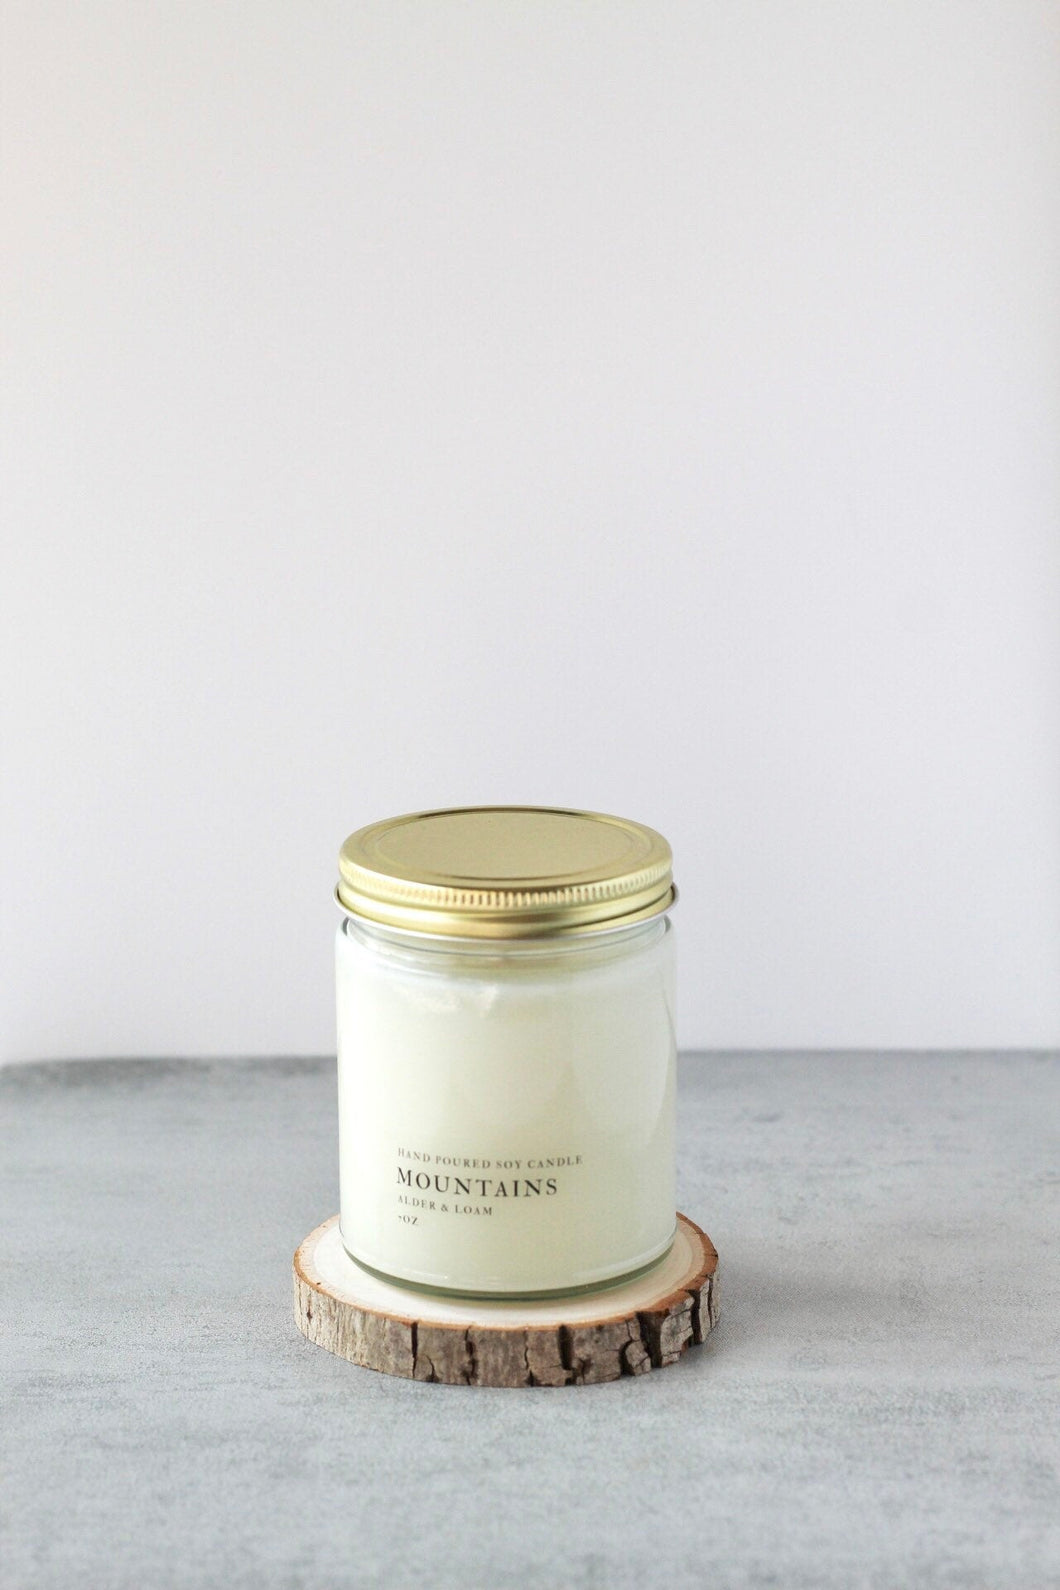 Mountains Soy Candle, Hand Poured, Natural, Eco Friendly, Earthy Scent, 7 oz Jar